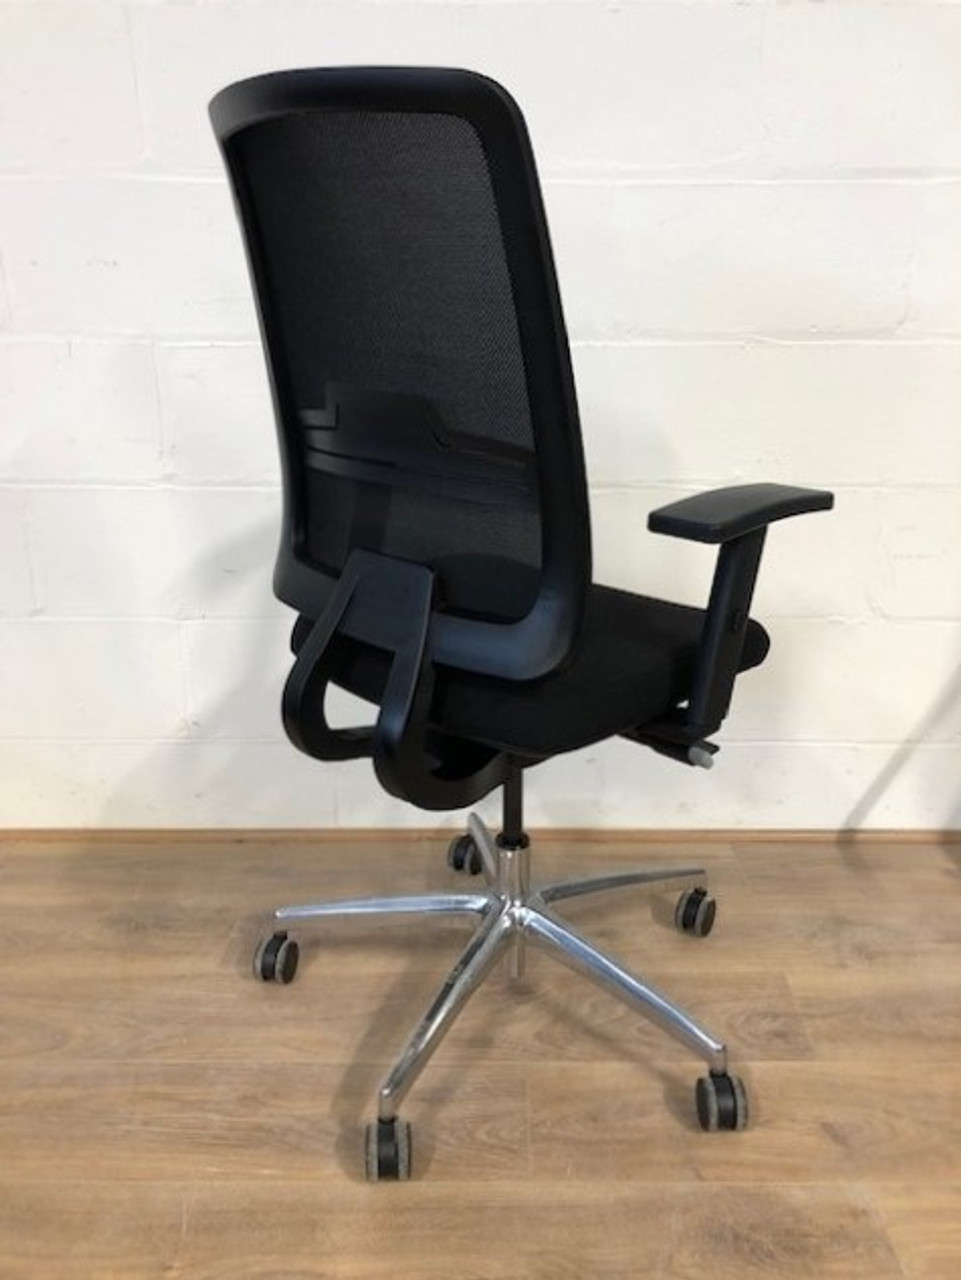 2nd hand office furniture essex_second hand office chairs to buy essex_value task chairs essex_refurbished office chairs chelmsford